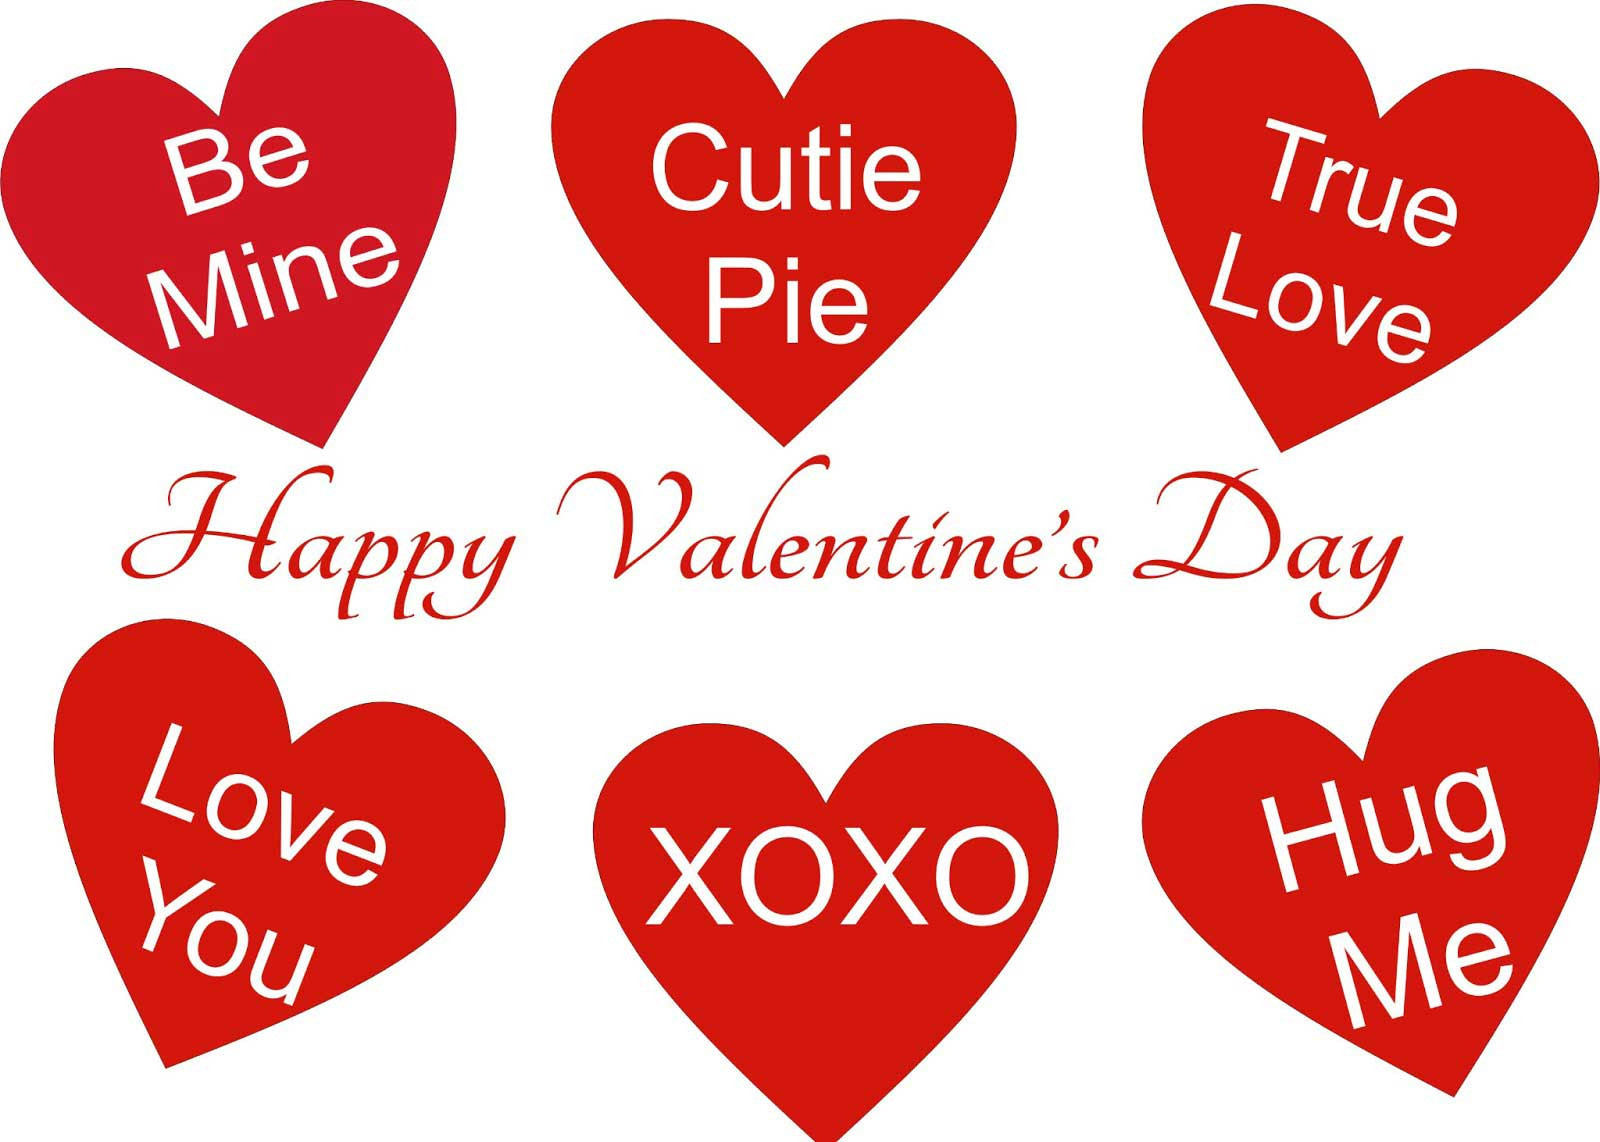 Quotes About Valentines Day
 Quotes About Valentines Day QuotesGram